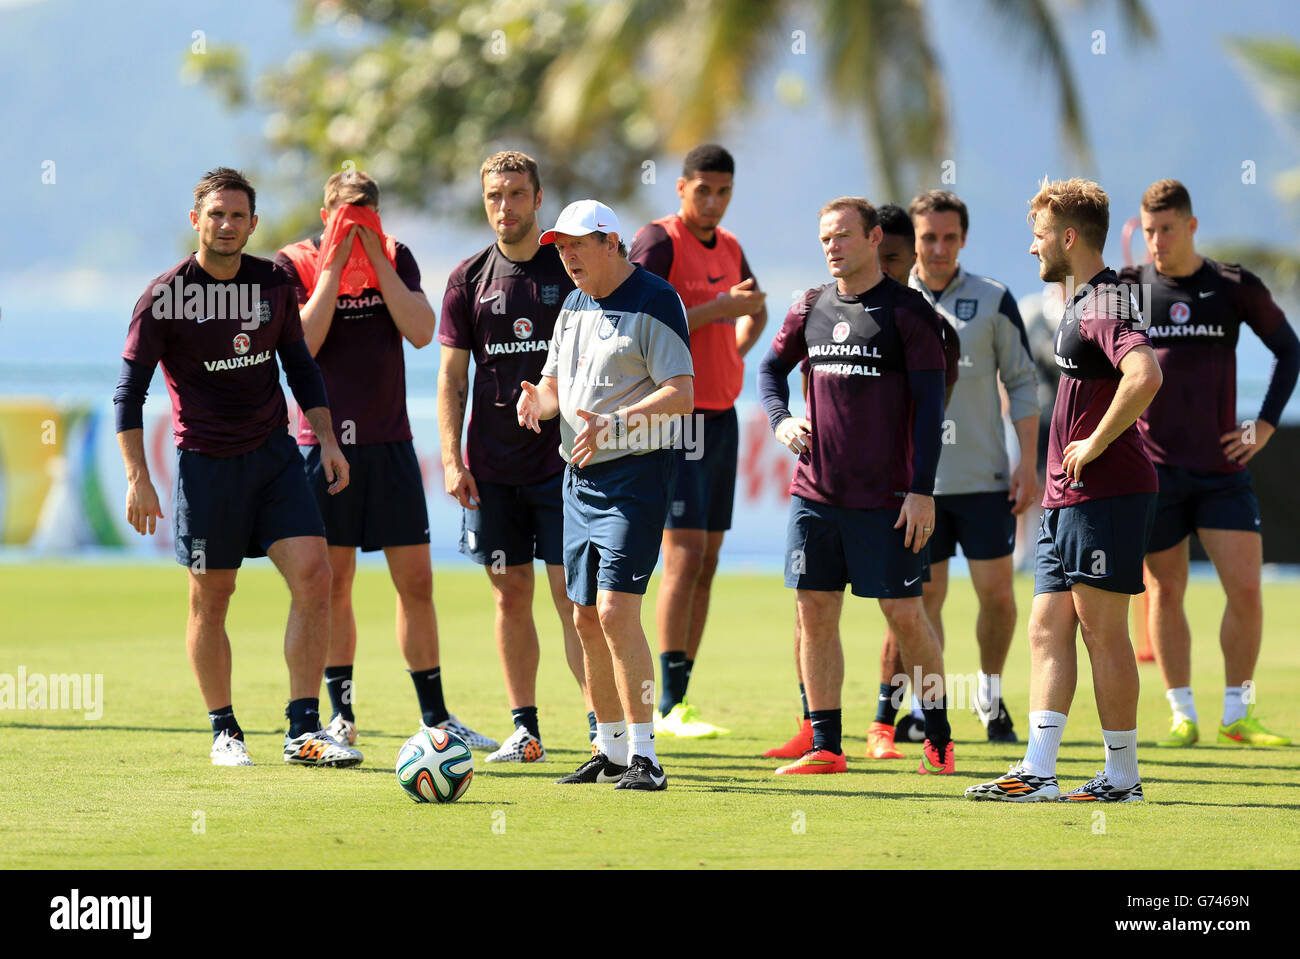 Soccer - FIFA World Cup 2014 - Group D - England v Italy - England Training Session and Press Conference - Urca Military Trai.... England manager Roy Hodgson speaks to his team during the training session at Urca Military Training Ground, Rio de Janeiro, Brazil. Stock Photo